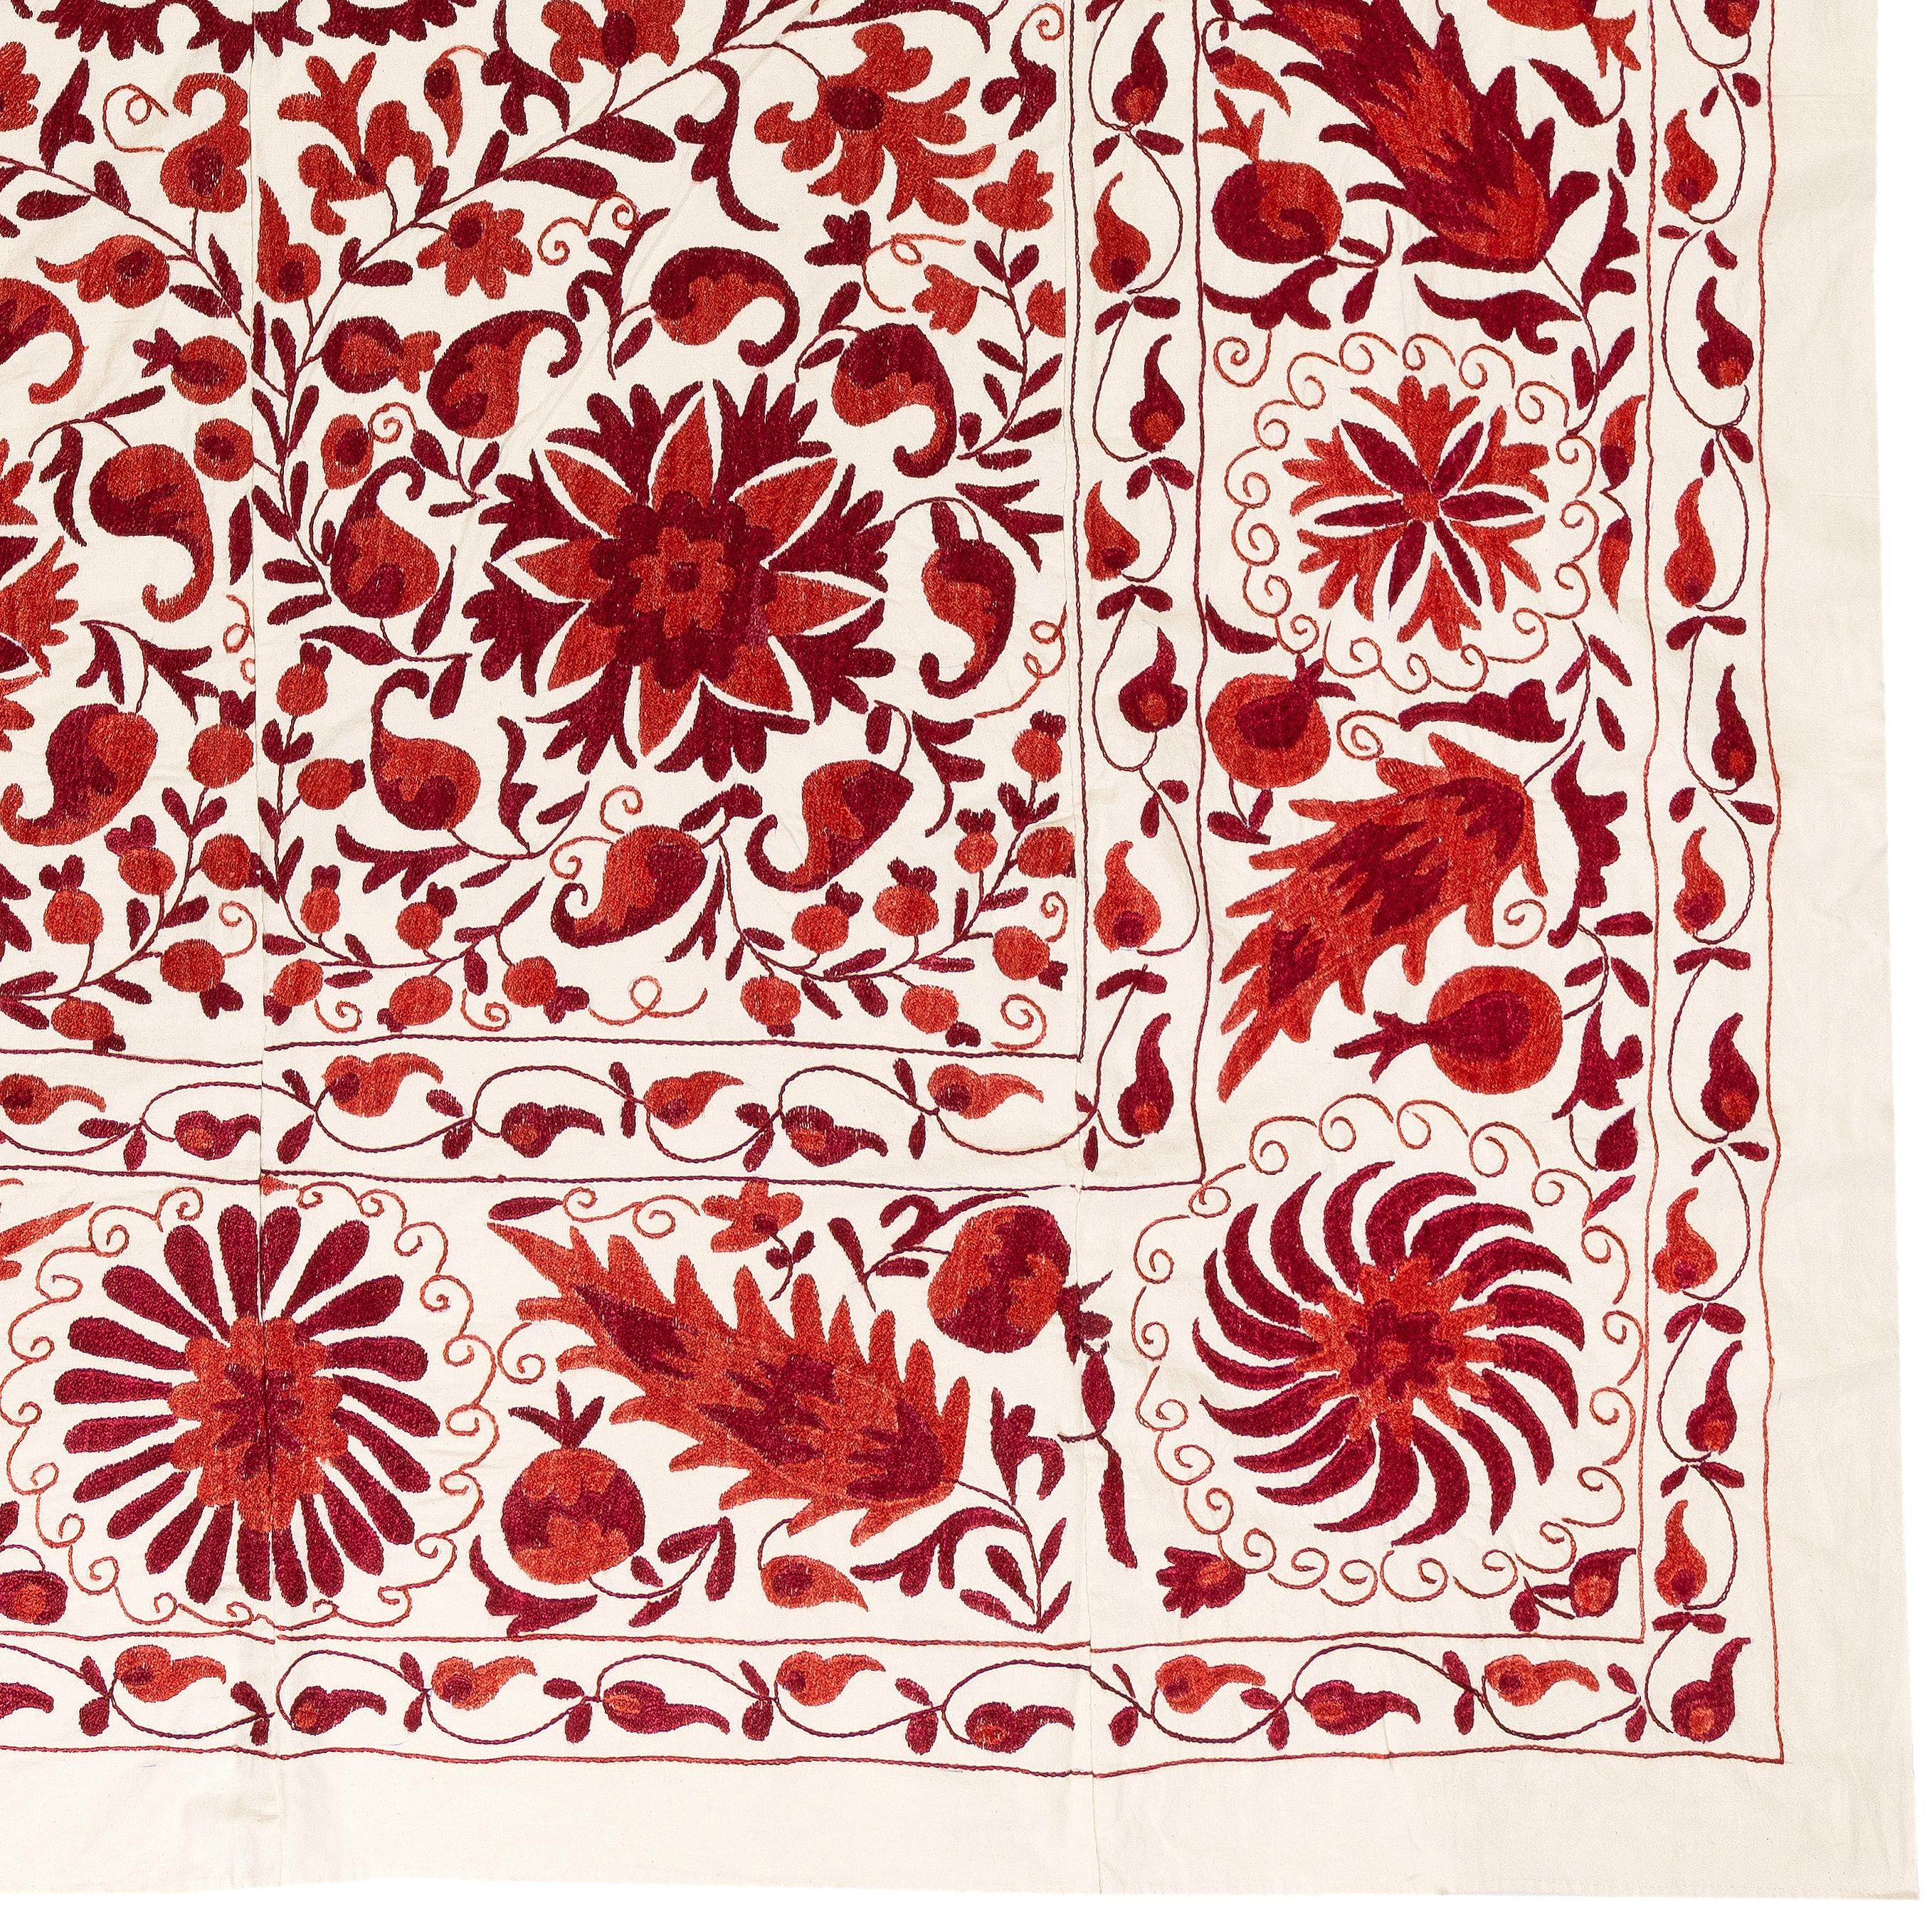 Embroidered 6.3x8 Ft Silk Embroidery Bed Cover in Red & Ivory, Handmade Suzani Wall Hanging